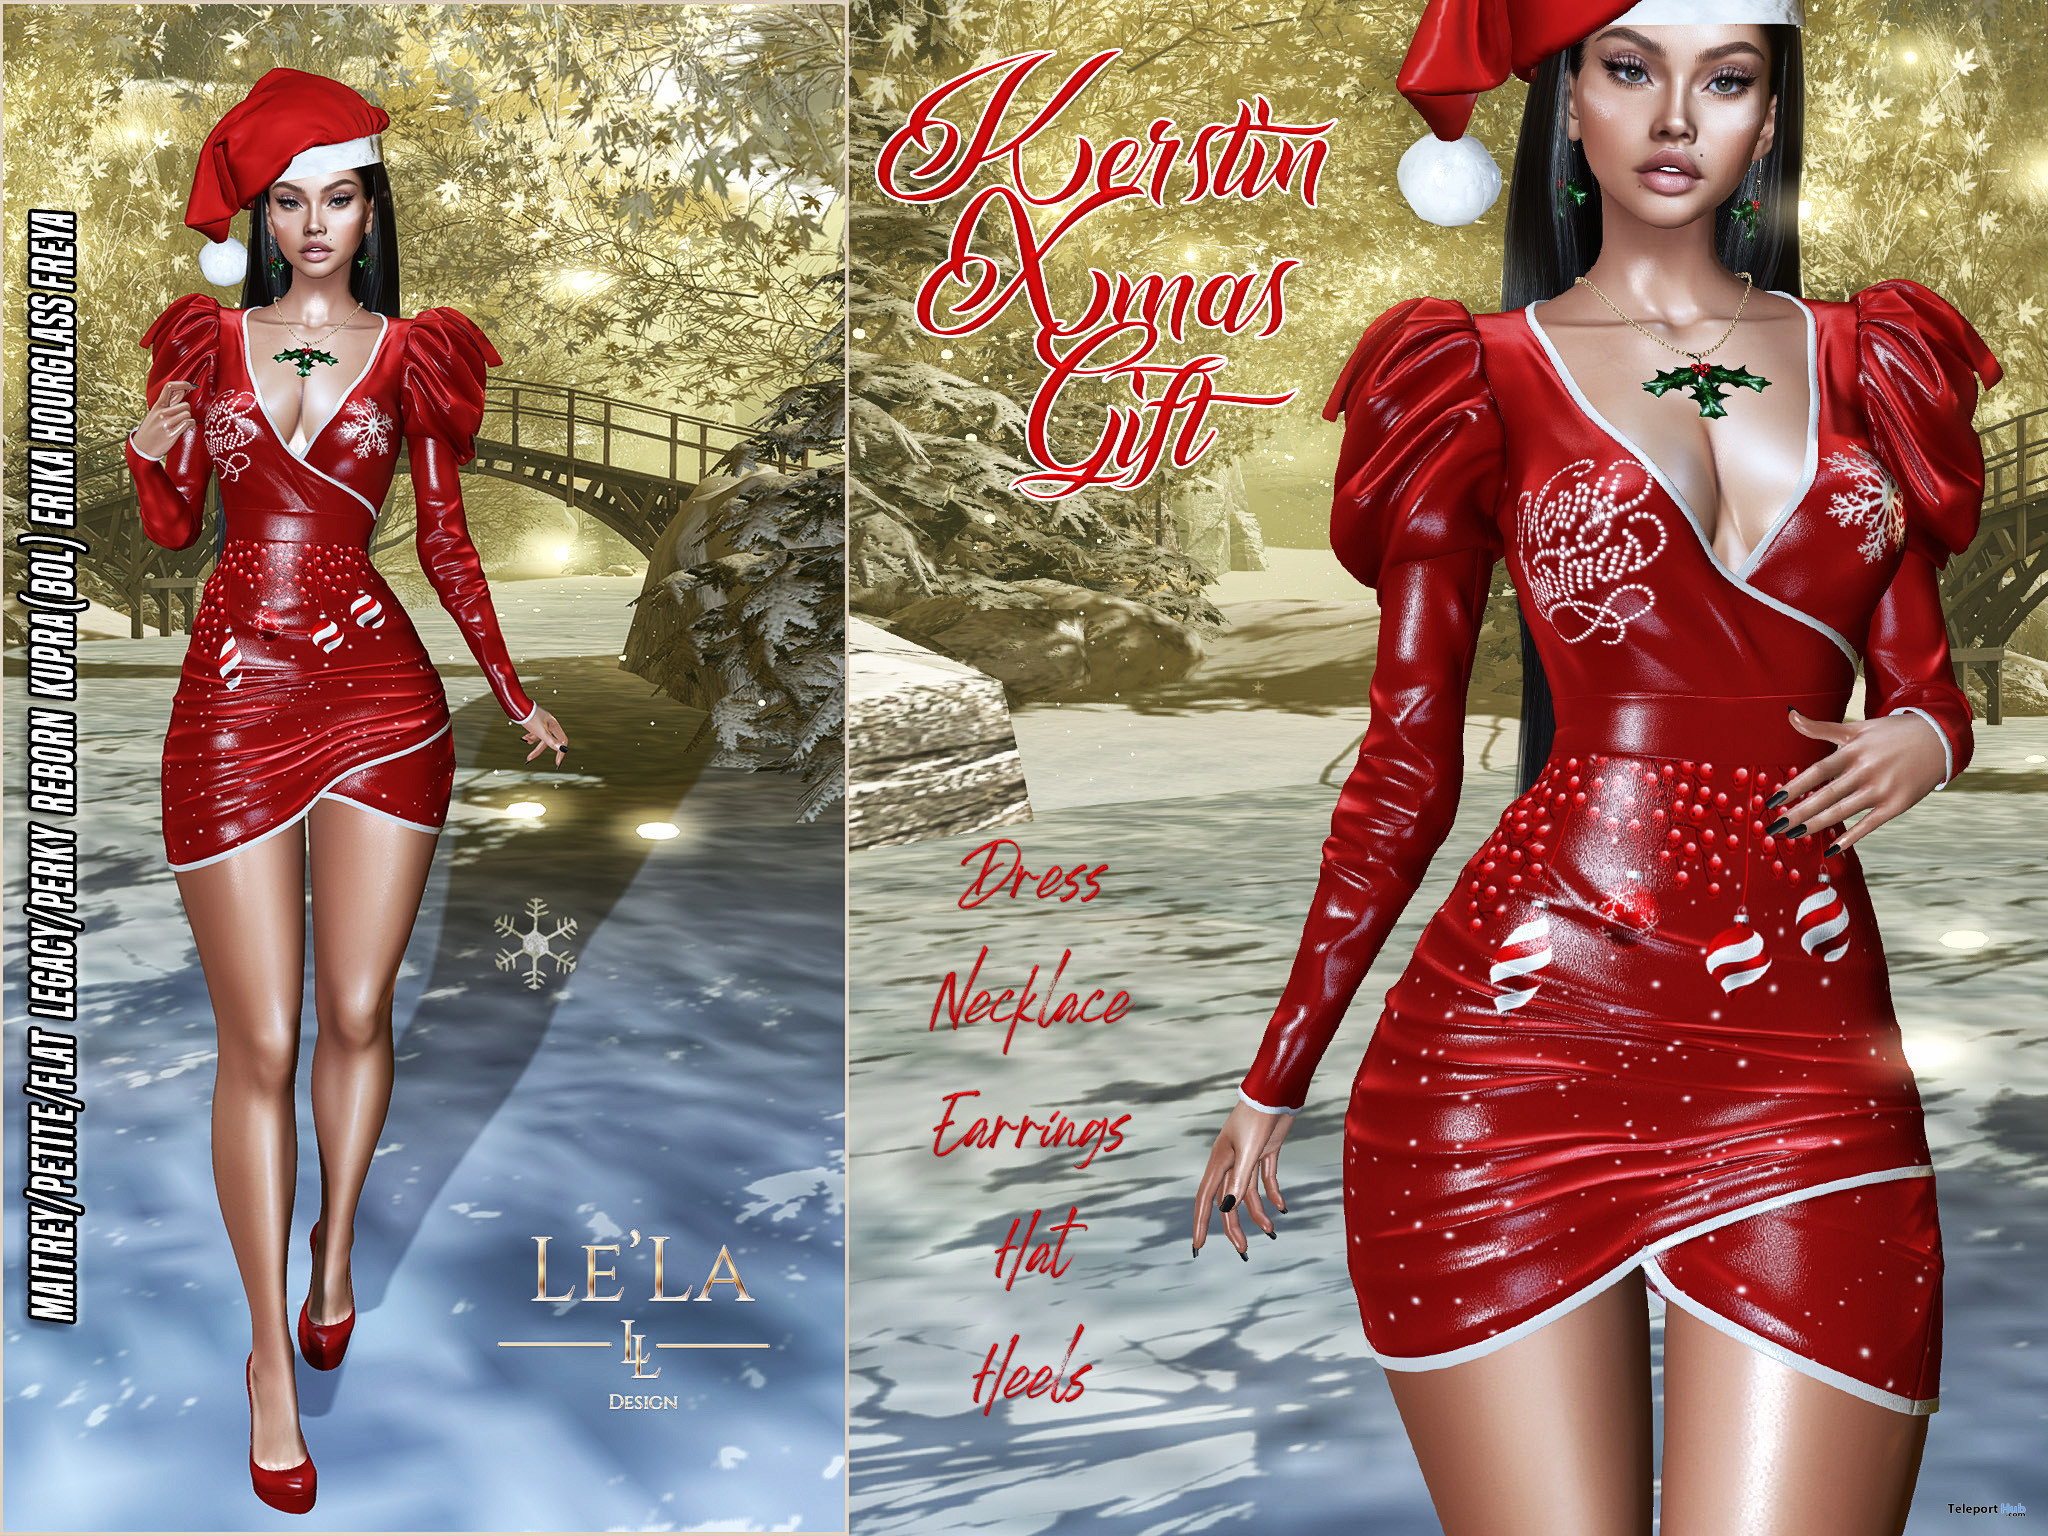 Kerstin Xmas Outfit December 2022 Group Gift by Le’La Design - Teleport Hub - teleporthub.com